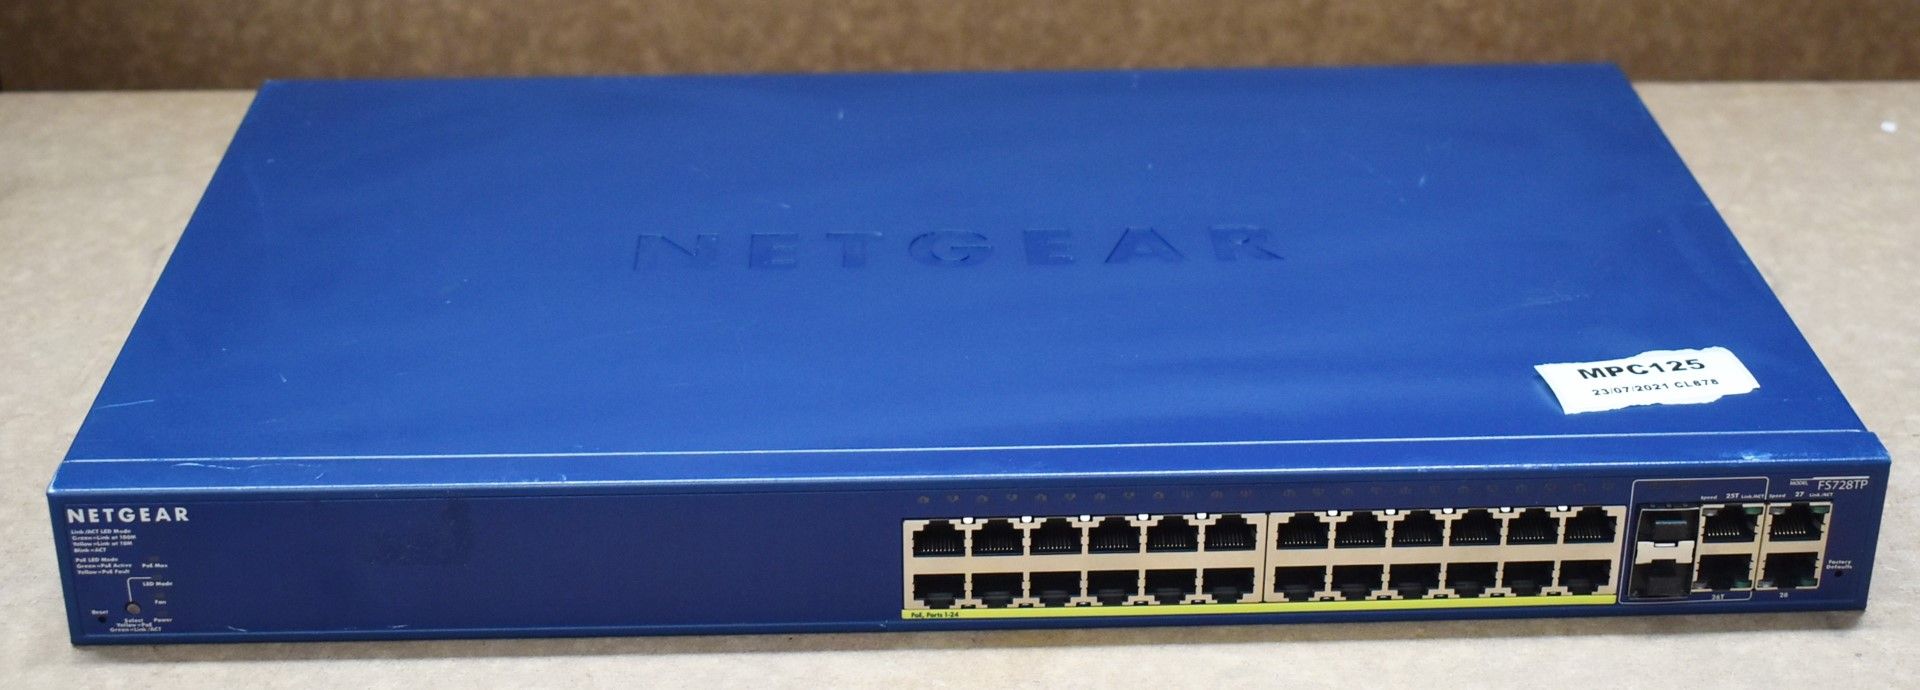 1 x Netgear FS728TP V2H1 24-Port 10/100 Smart Managed Switch with POE - RRP £453 - Includes Power